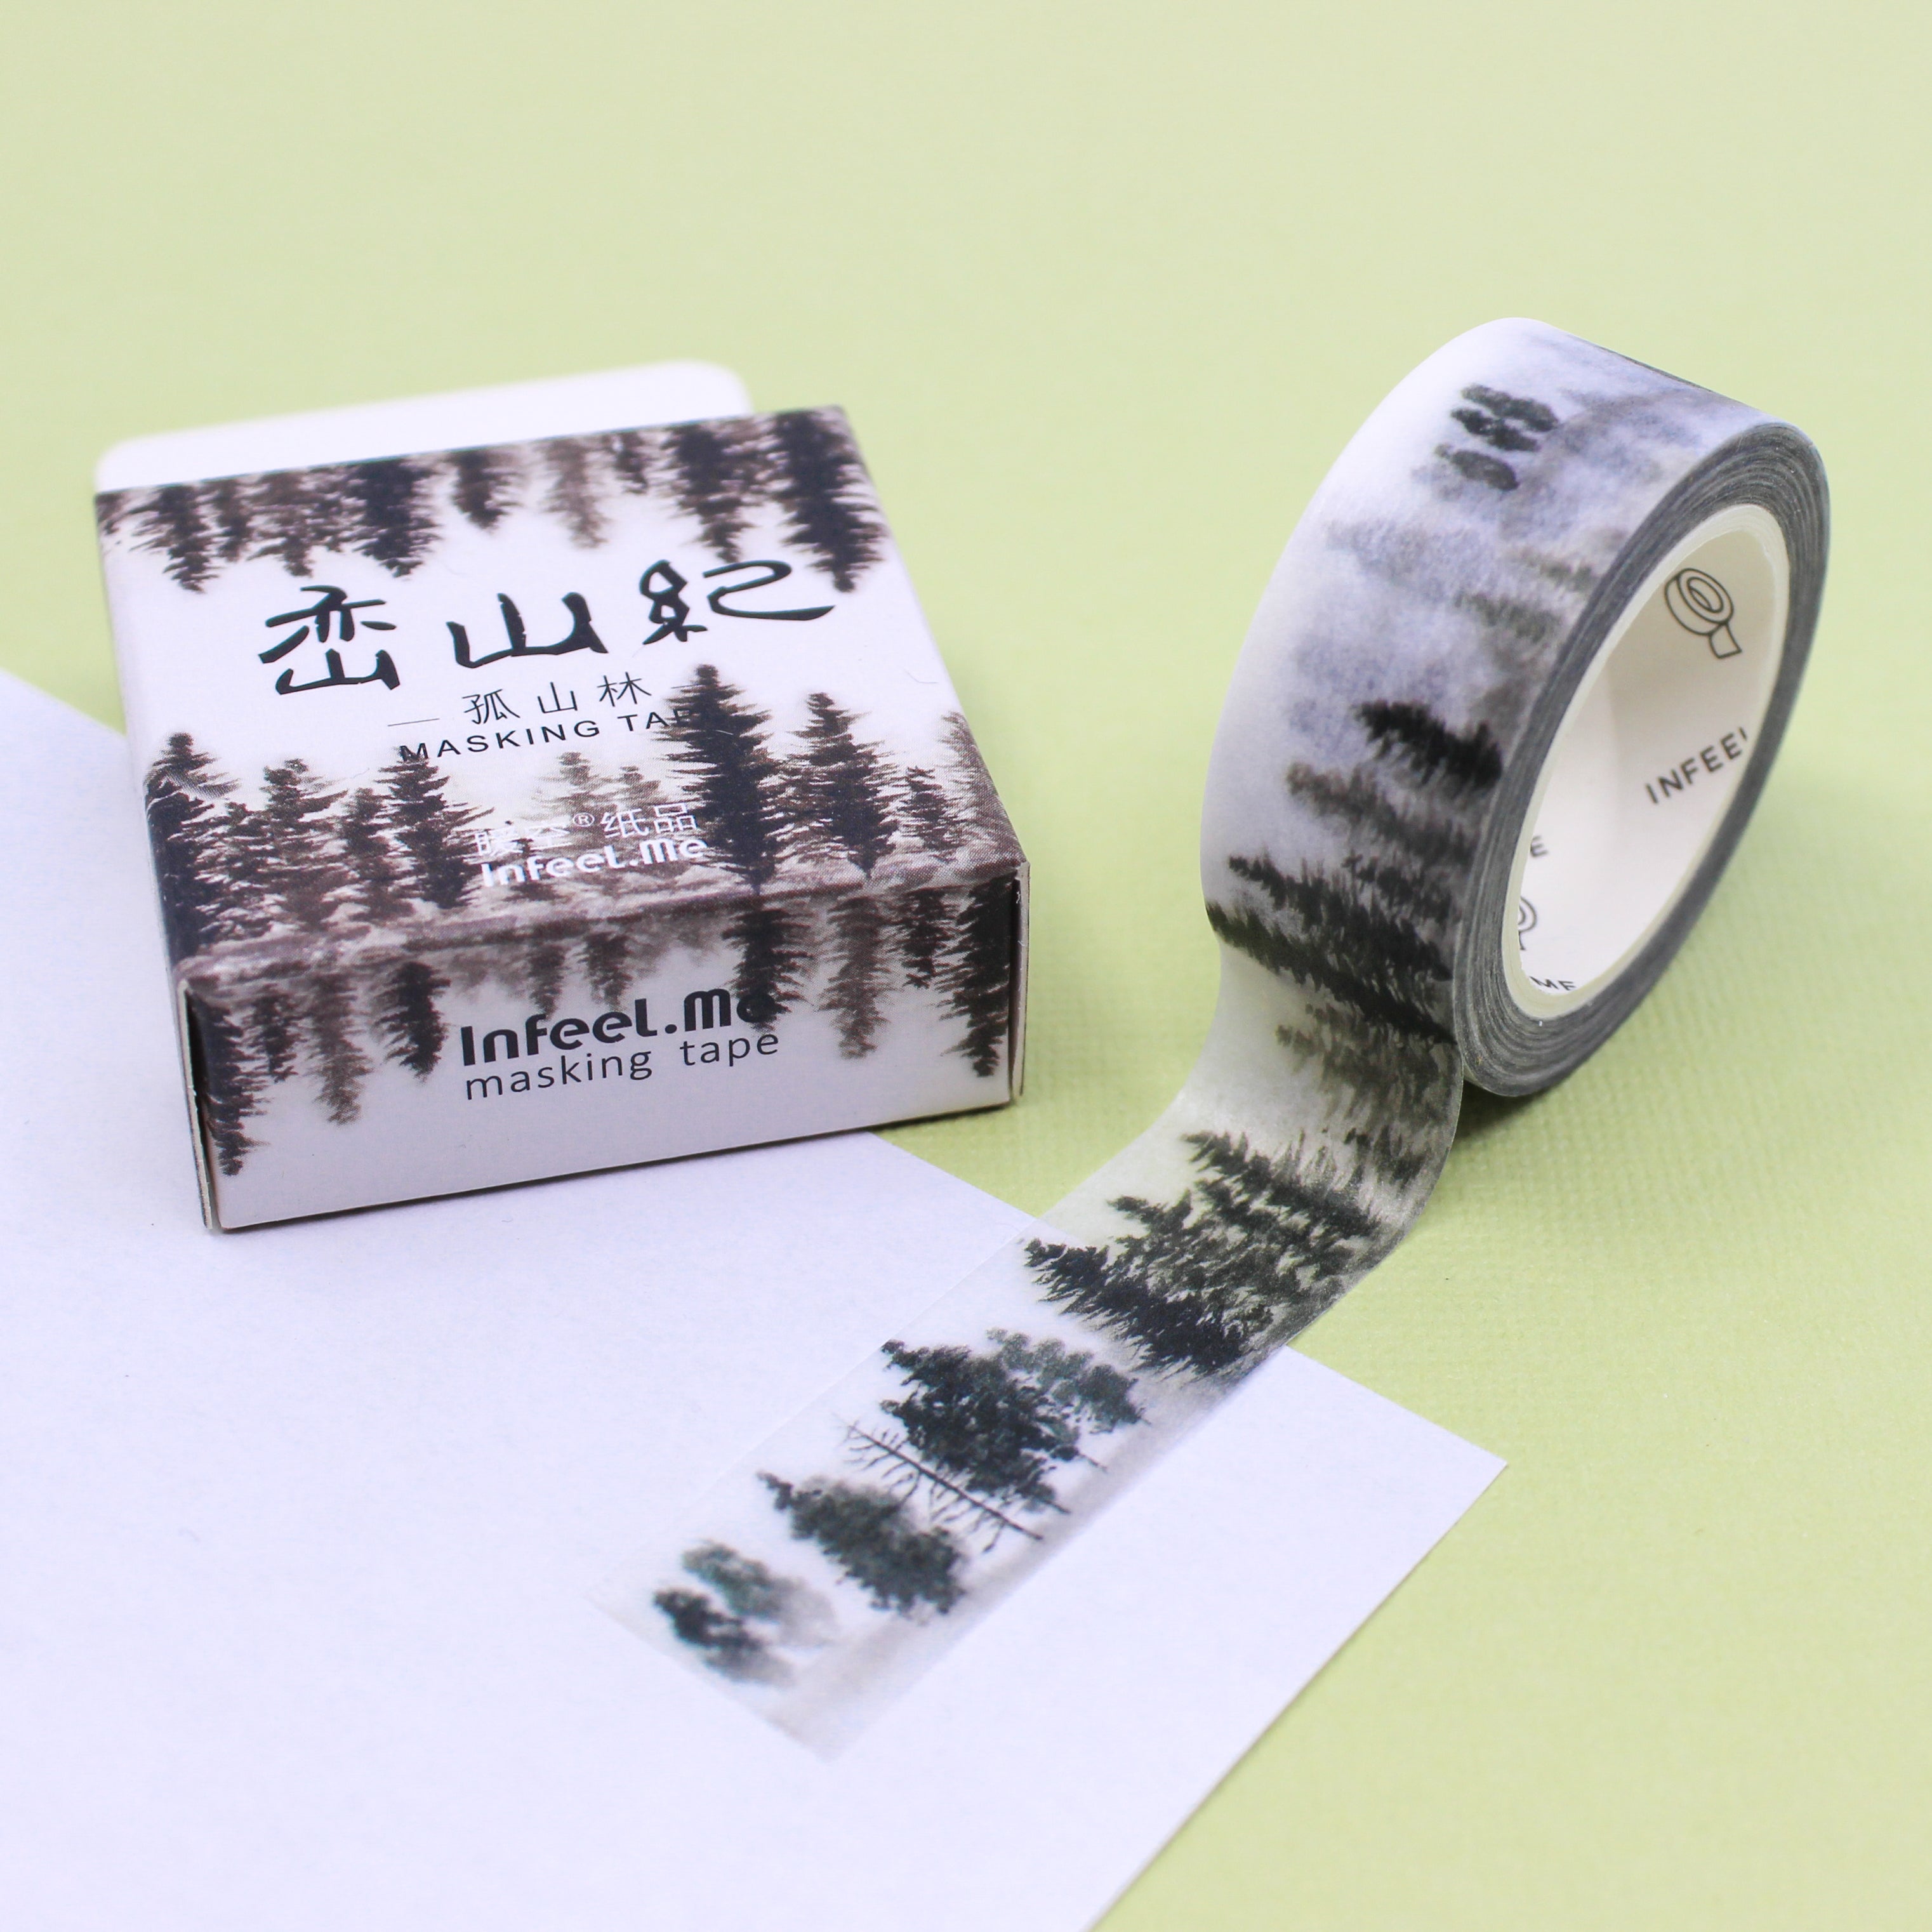 This is shadowy forest landscape trees pattern washi tape from BBB Supplies Craft Shop